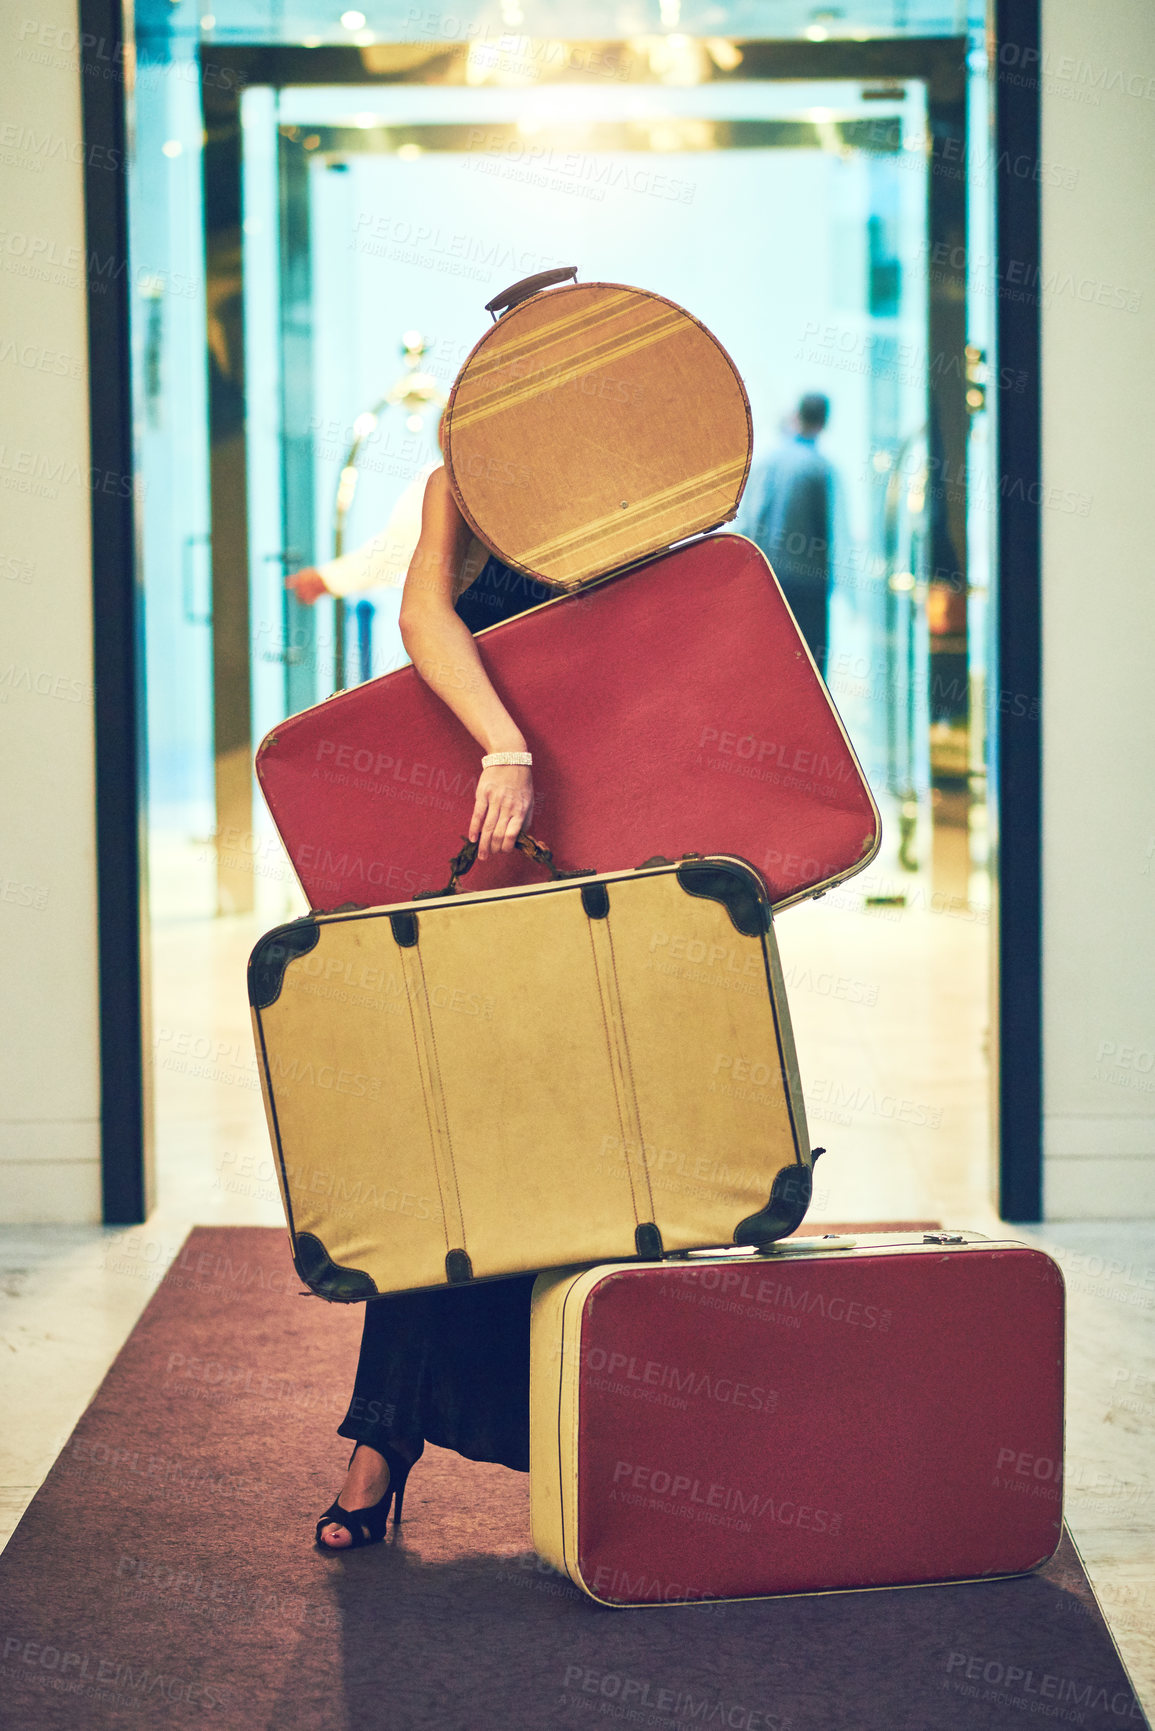 Buy stock photo Shot of an unrecognizable young woman carrying a whole bunch of luggage while trying to walk down the lobby of a hotel